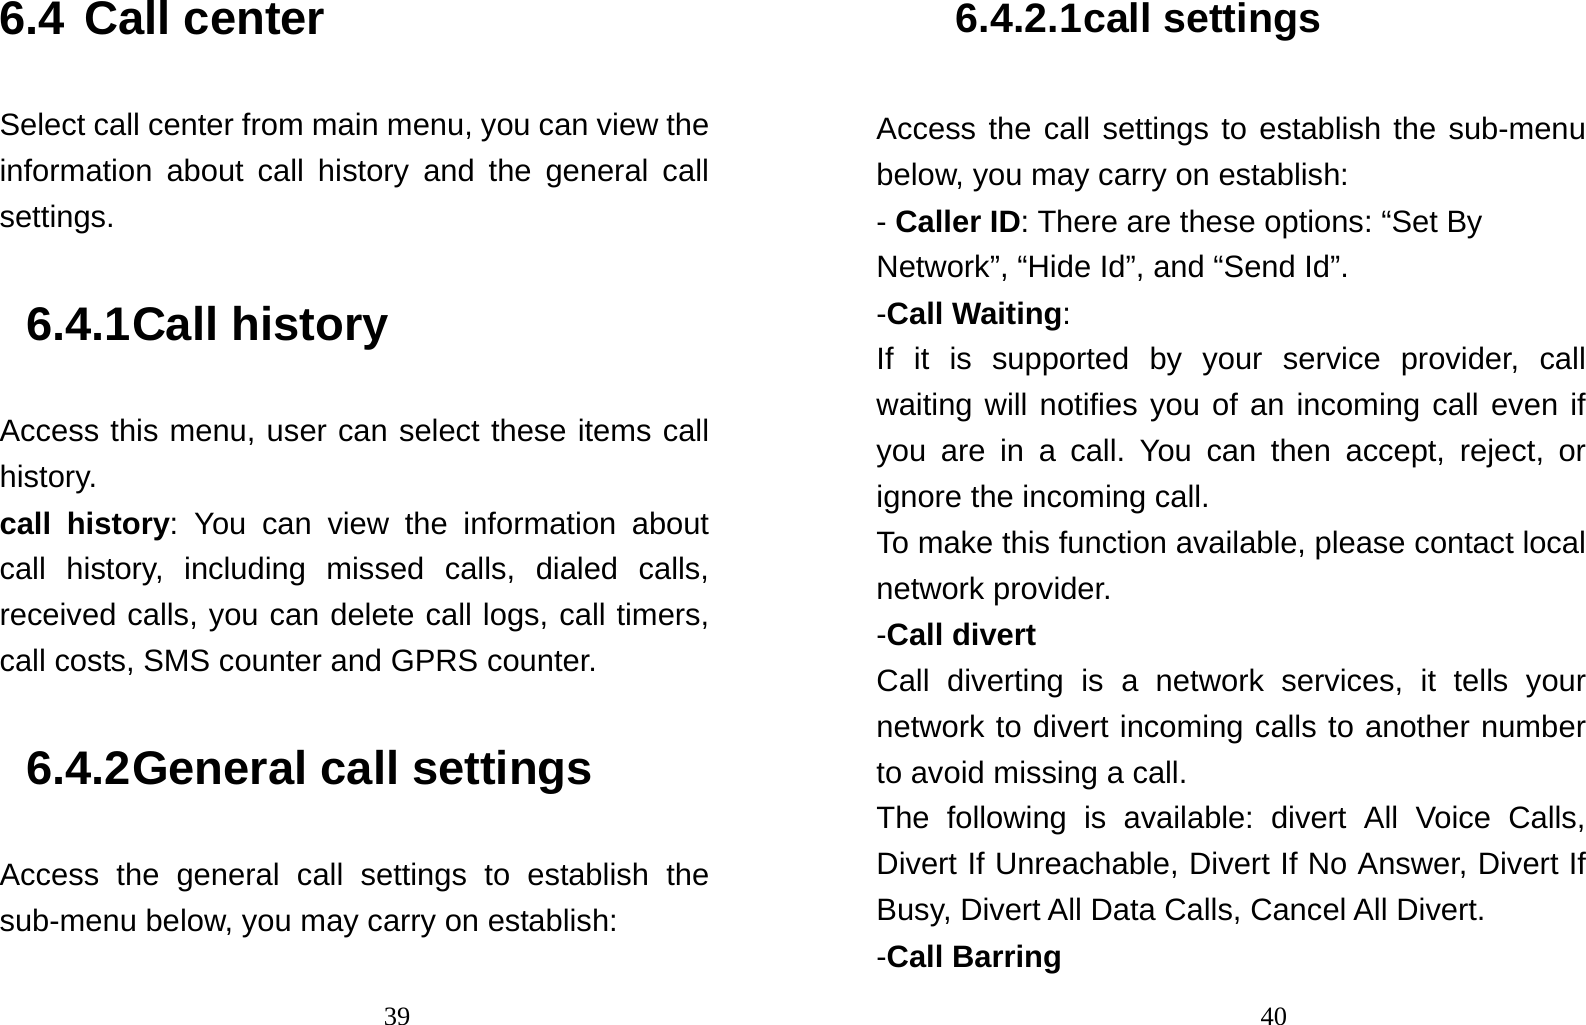                                396.4 Call center Select call center from main menu, you can view the information about call history and the general call settings. 6.4.1 Call history Access this menu, user can select these items call history. call history: You can view the information about  call history, including missed calls, dialed calls, received calls, you can delete call logs, call timers, call costs, SMS counter and GPRS counter. 6.4.2 General call settings Access the general call settings to establish the sub-menu below, you may carry on establish:                                 406.4.2.1 call settings Access the call settings to establish the sub-menu below, you may carry on establish: - Caller ID: There are these options: “Set By Network”, “Hide Id”, and “Send Id”. -Call Waiting: If it is supported by your service provider, call waiting will notifies you of an incoming call even if you are in a call. You can then accept, reject, or ignore the incoming call. To make this function available, please contact local network provider. -Call divert Call diverting is a network services, it tells your network to divert incoming calls to another number to avoid missing a call. The following is available: divert All Voice Calls, Divert If Unreachable, Divert If No Answer, Divert If Busy, Divert All Data Calls, Cancel All Divert. -Call Barring 